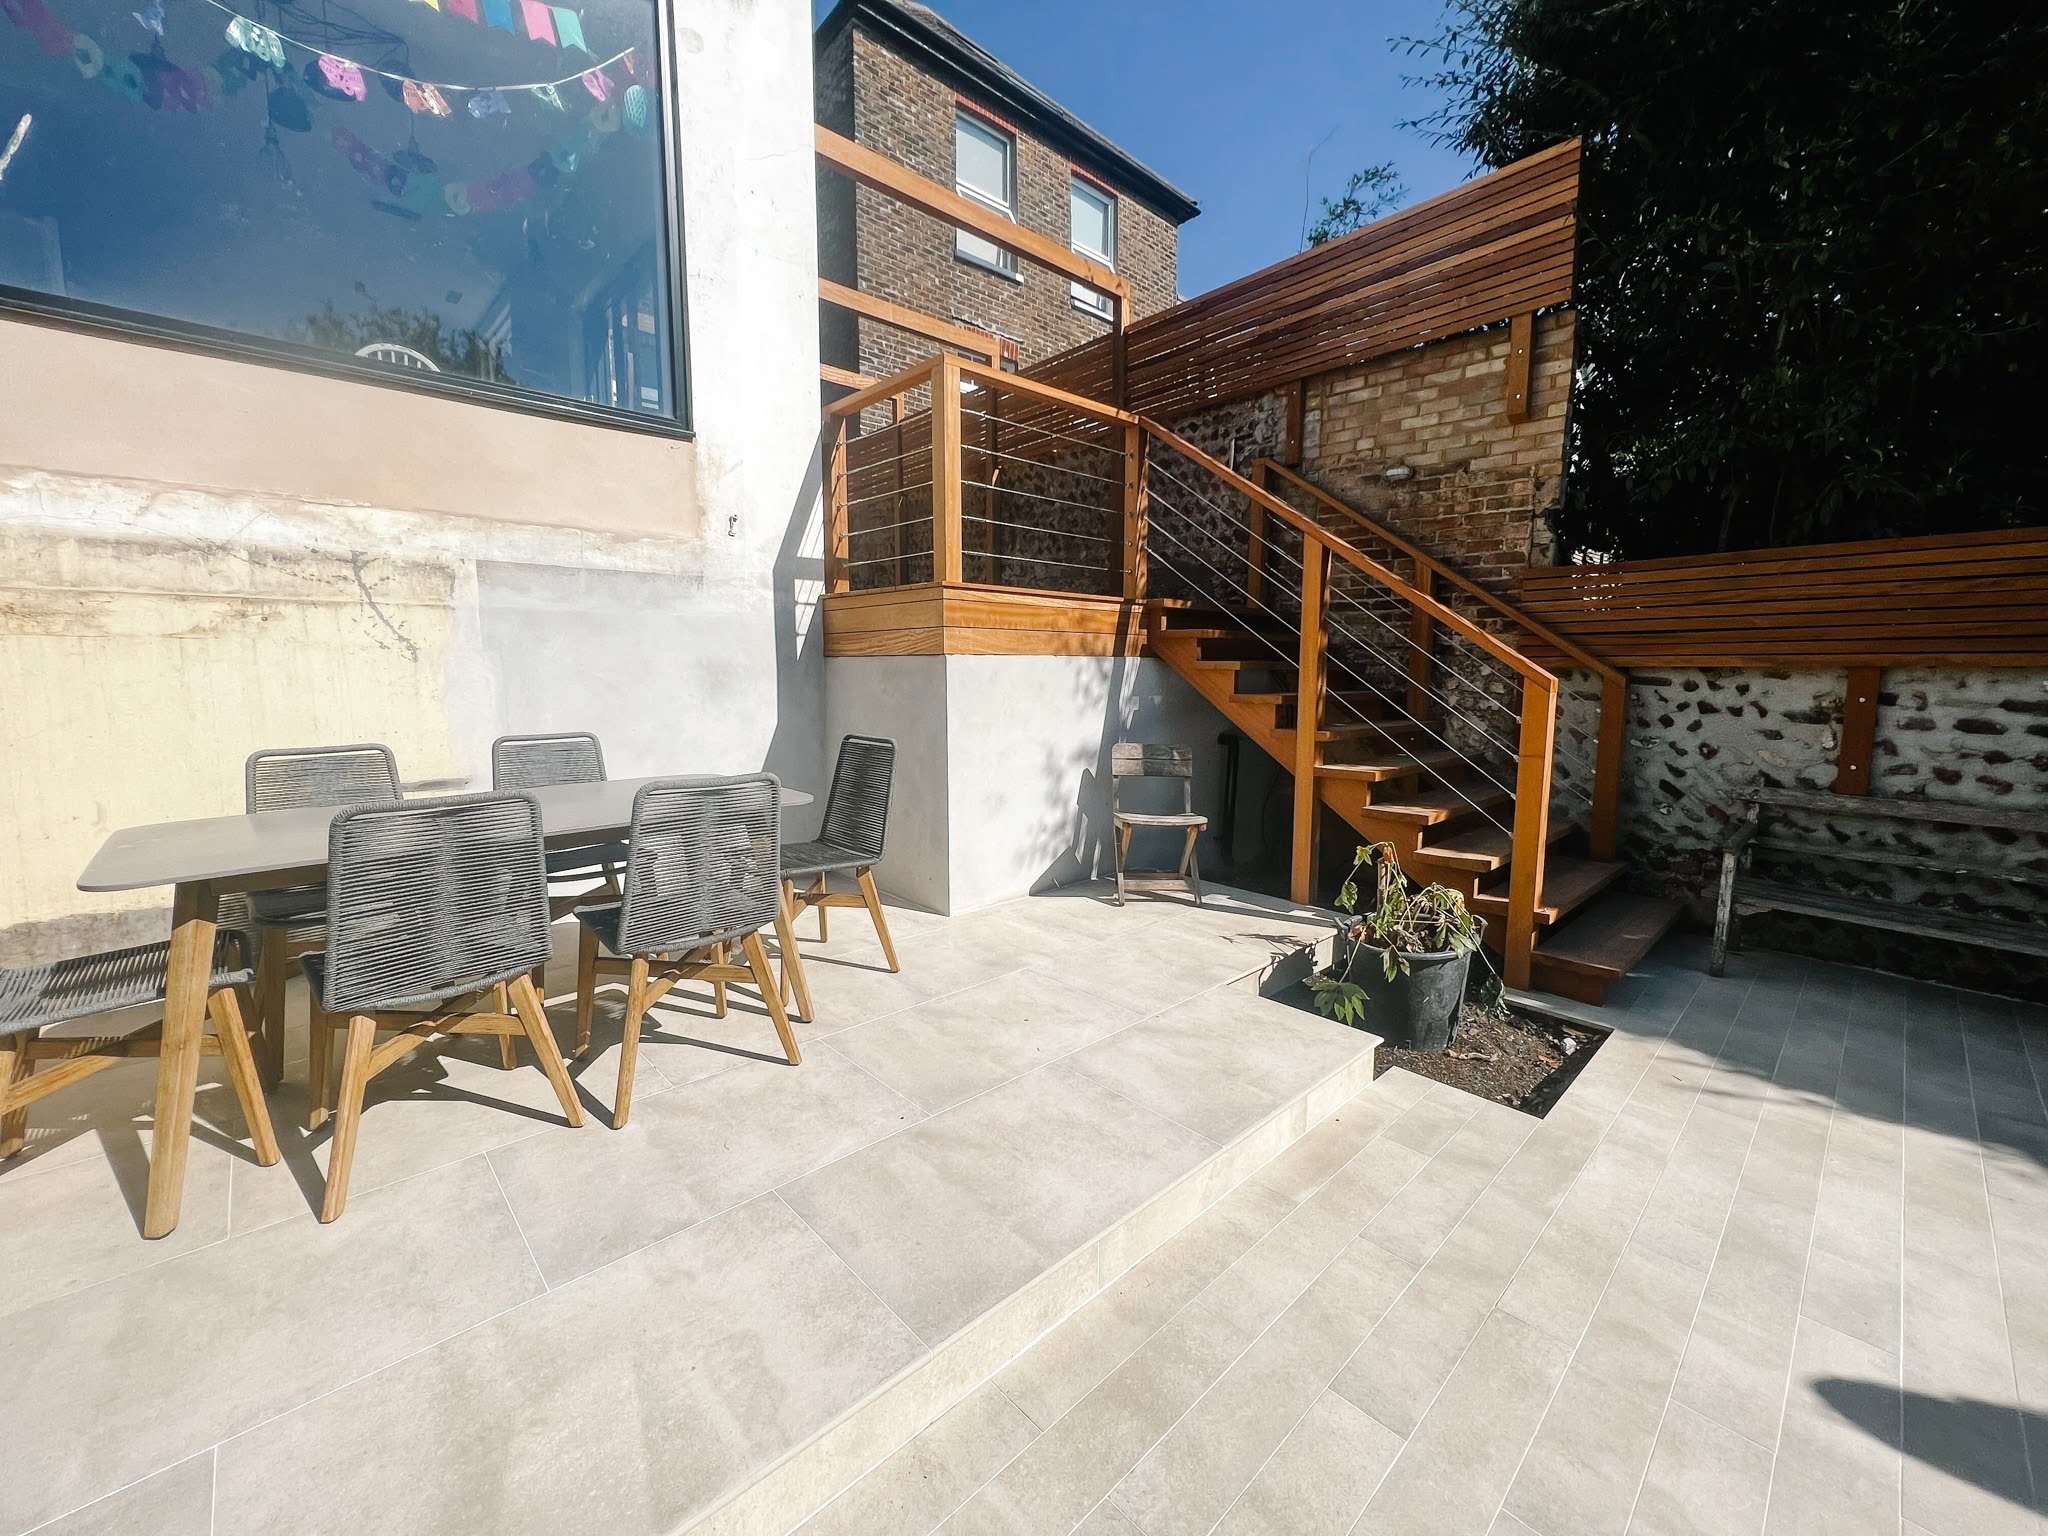 Victorian terrace garden build. Landscaping brighton and hove